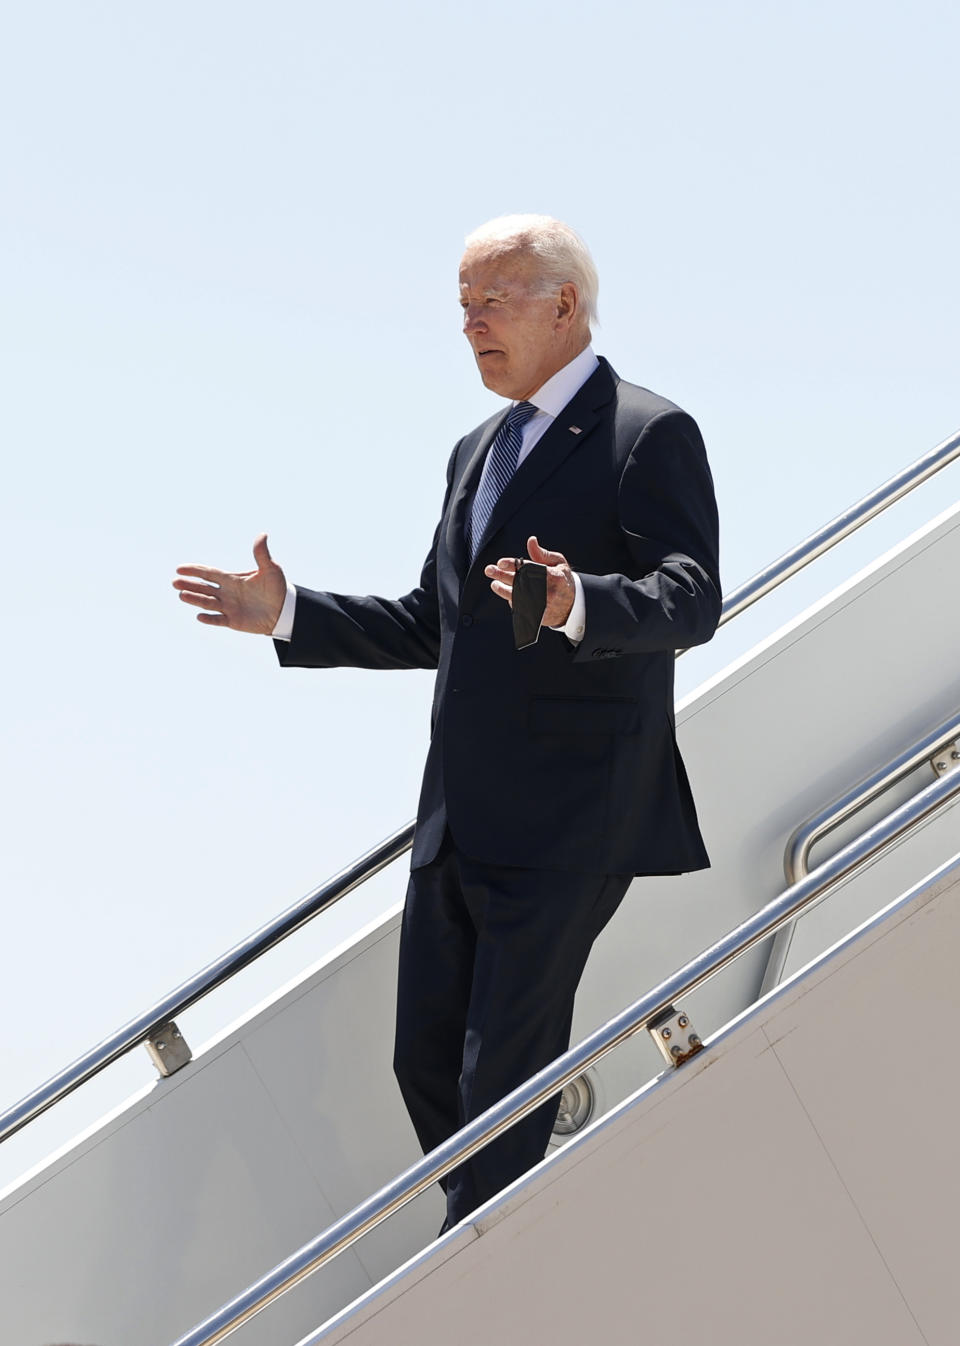 U.S. President Joe Biden walks down the steps of Airforce One on arrival at the Torreon air base in Madrid, Spain, Tuesday June 28, 2022. North Atlantic Treaty Organization heads of state will meet for a NATO summit in Madrid from Tuesday through Thursday. (J.J.Guillen/Pool photo via AP)